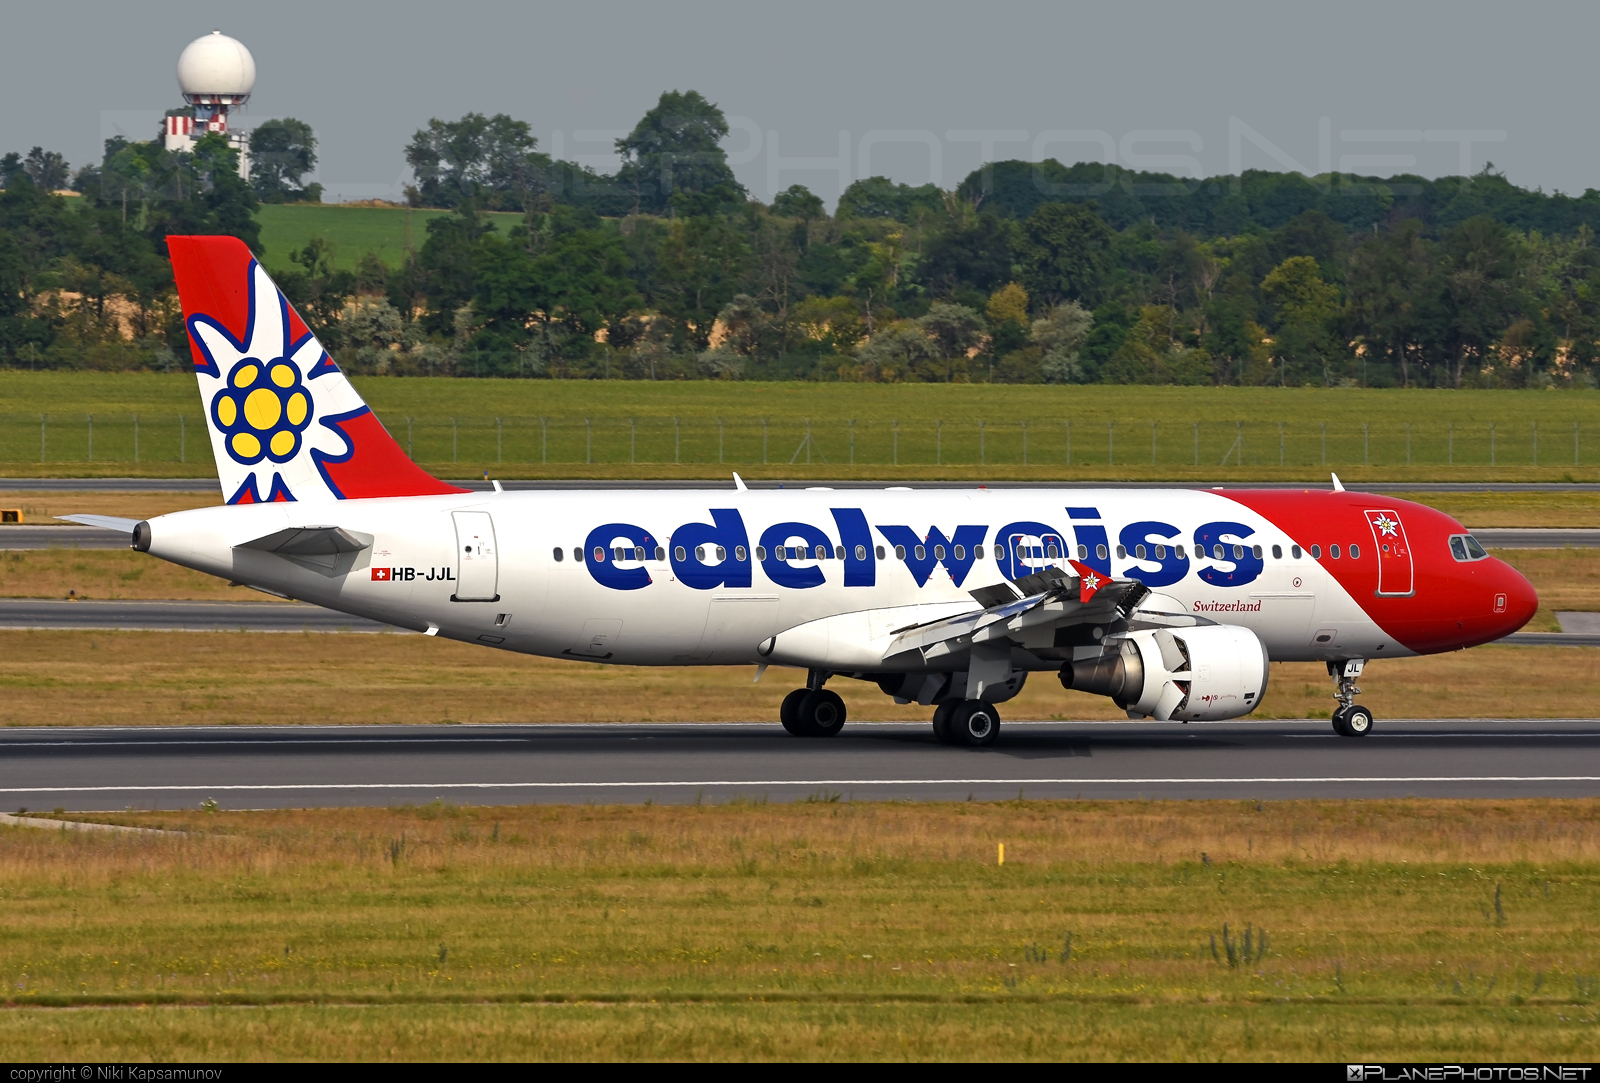 Airbus A320-214 - HB-JJL operated by Edelweiss Air #EdelweissAir #a320 #a320family #airbus #airbus320